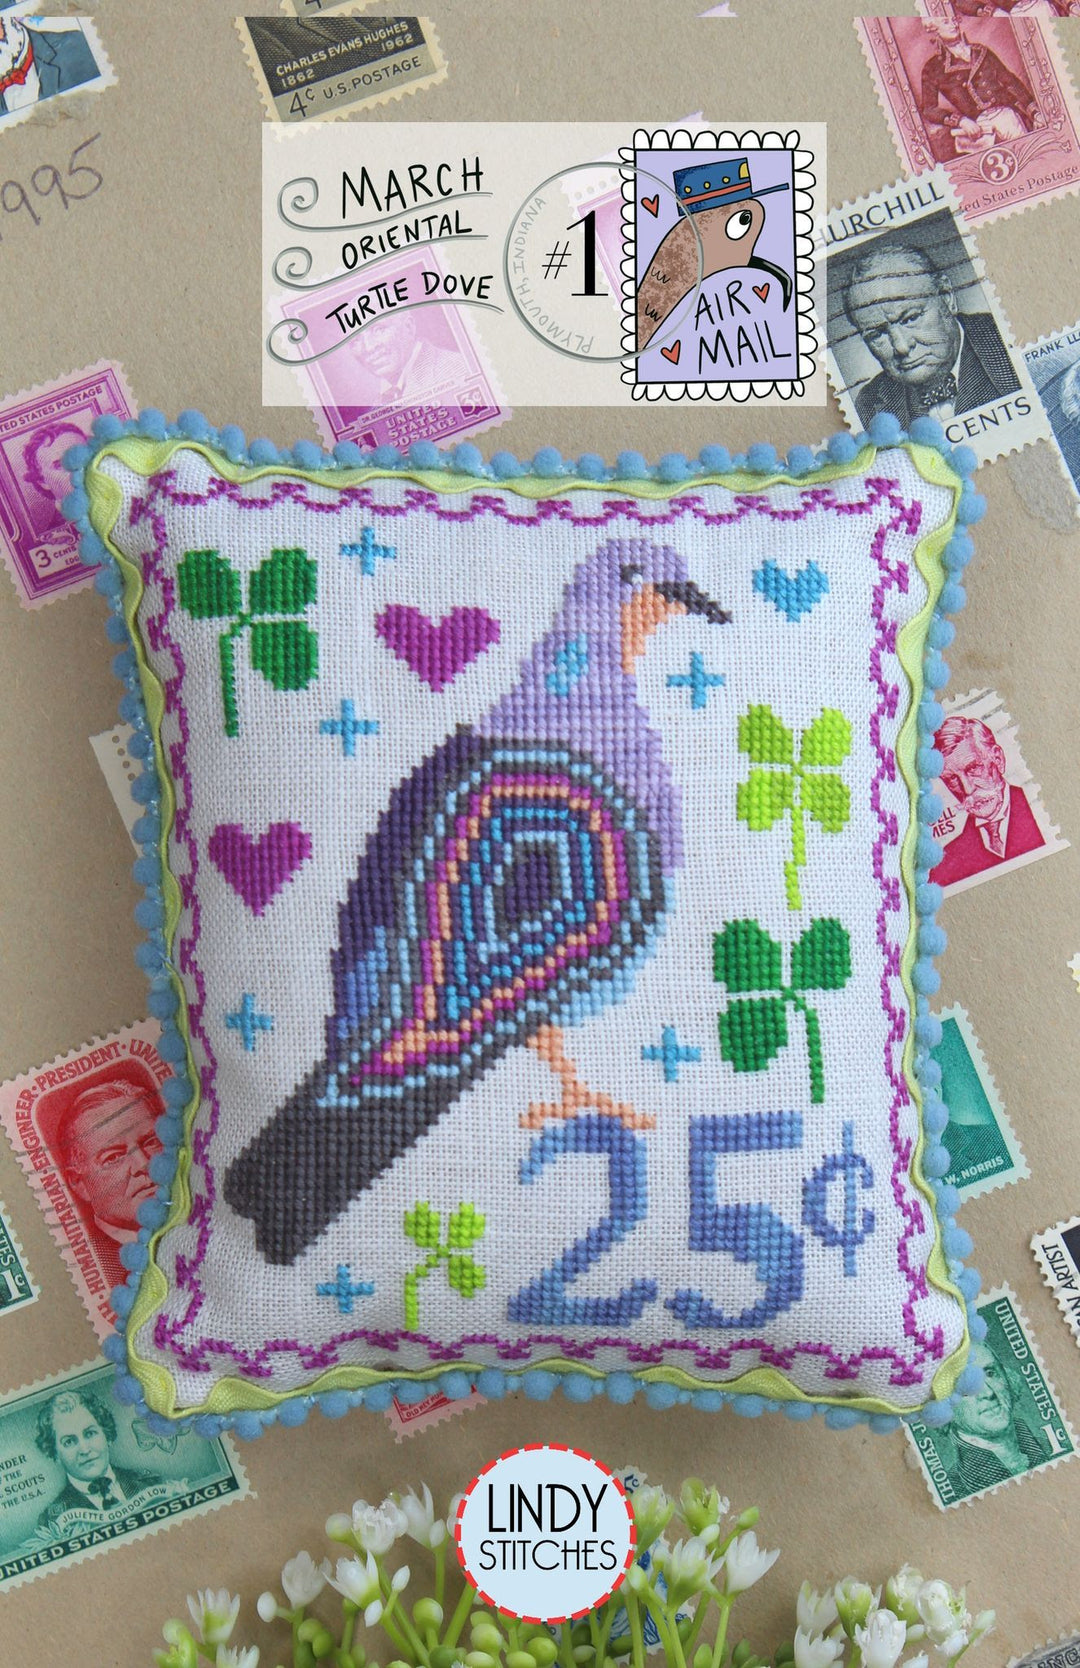 Oriental Turtle Dove - Air Mail March | Lindy Stitches